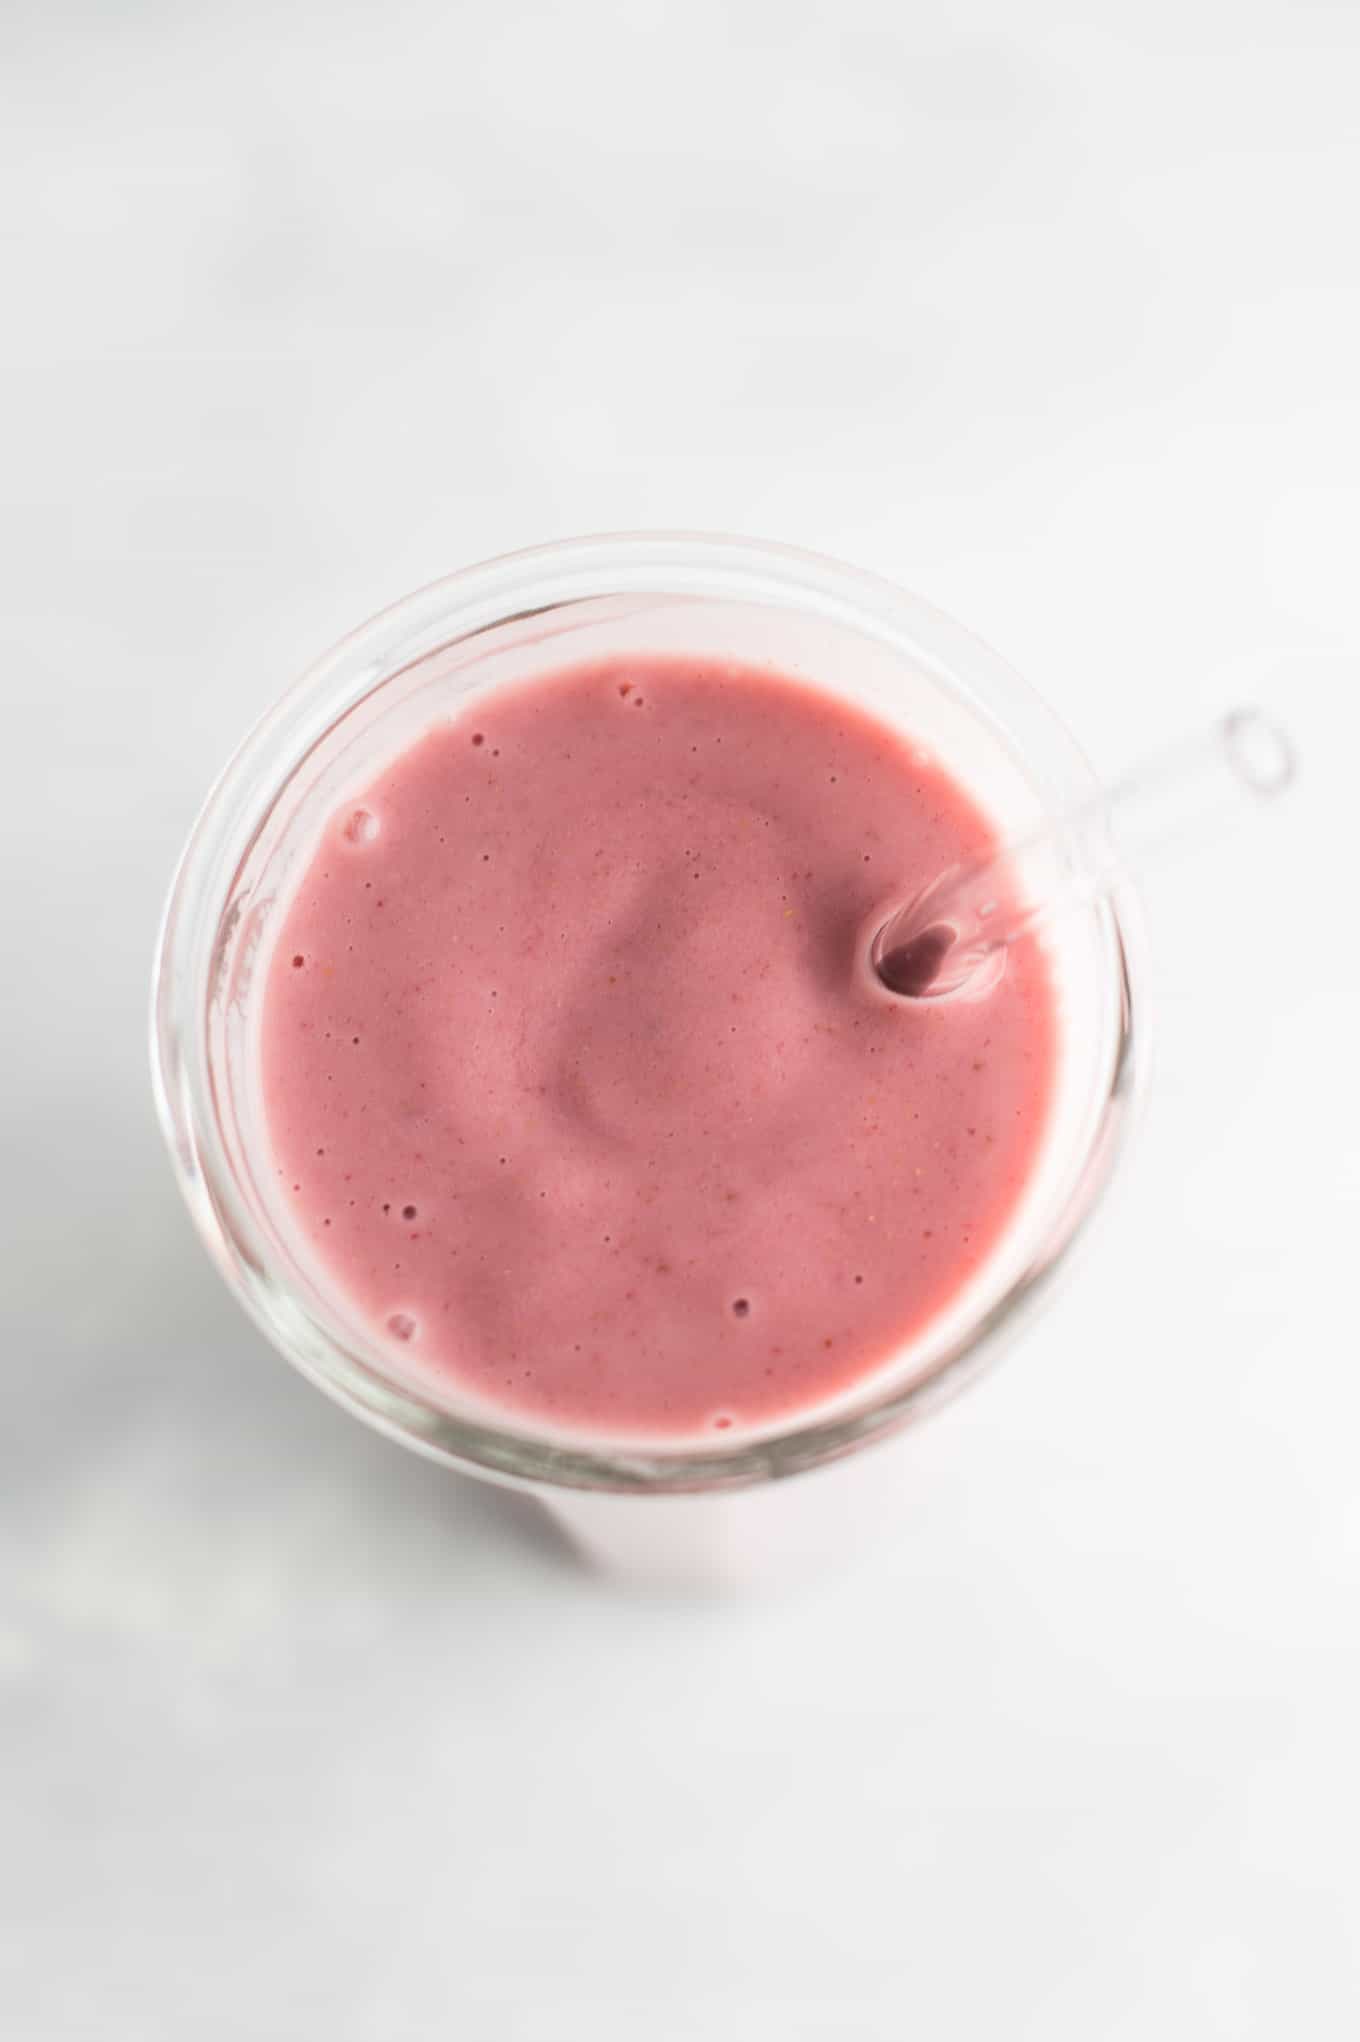 pink smoothie from an overhead view